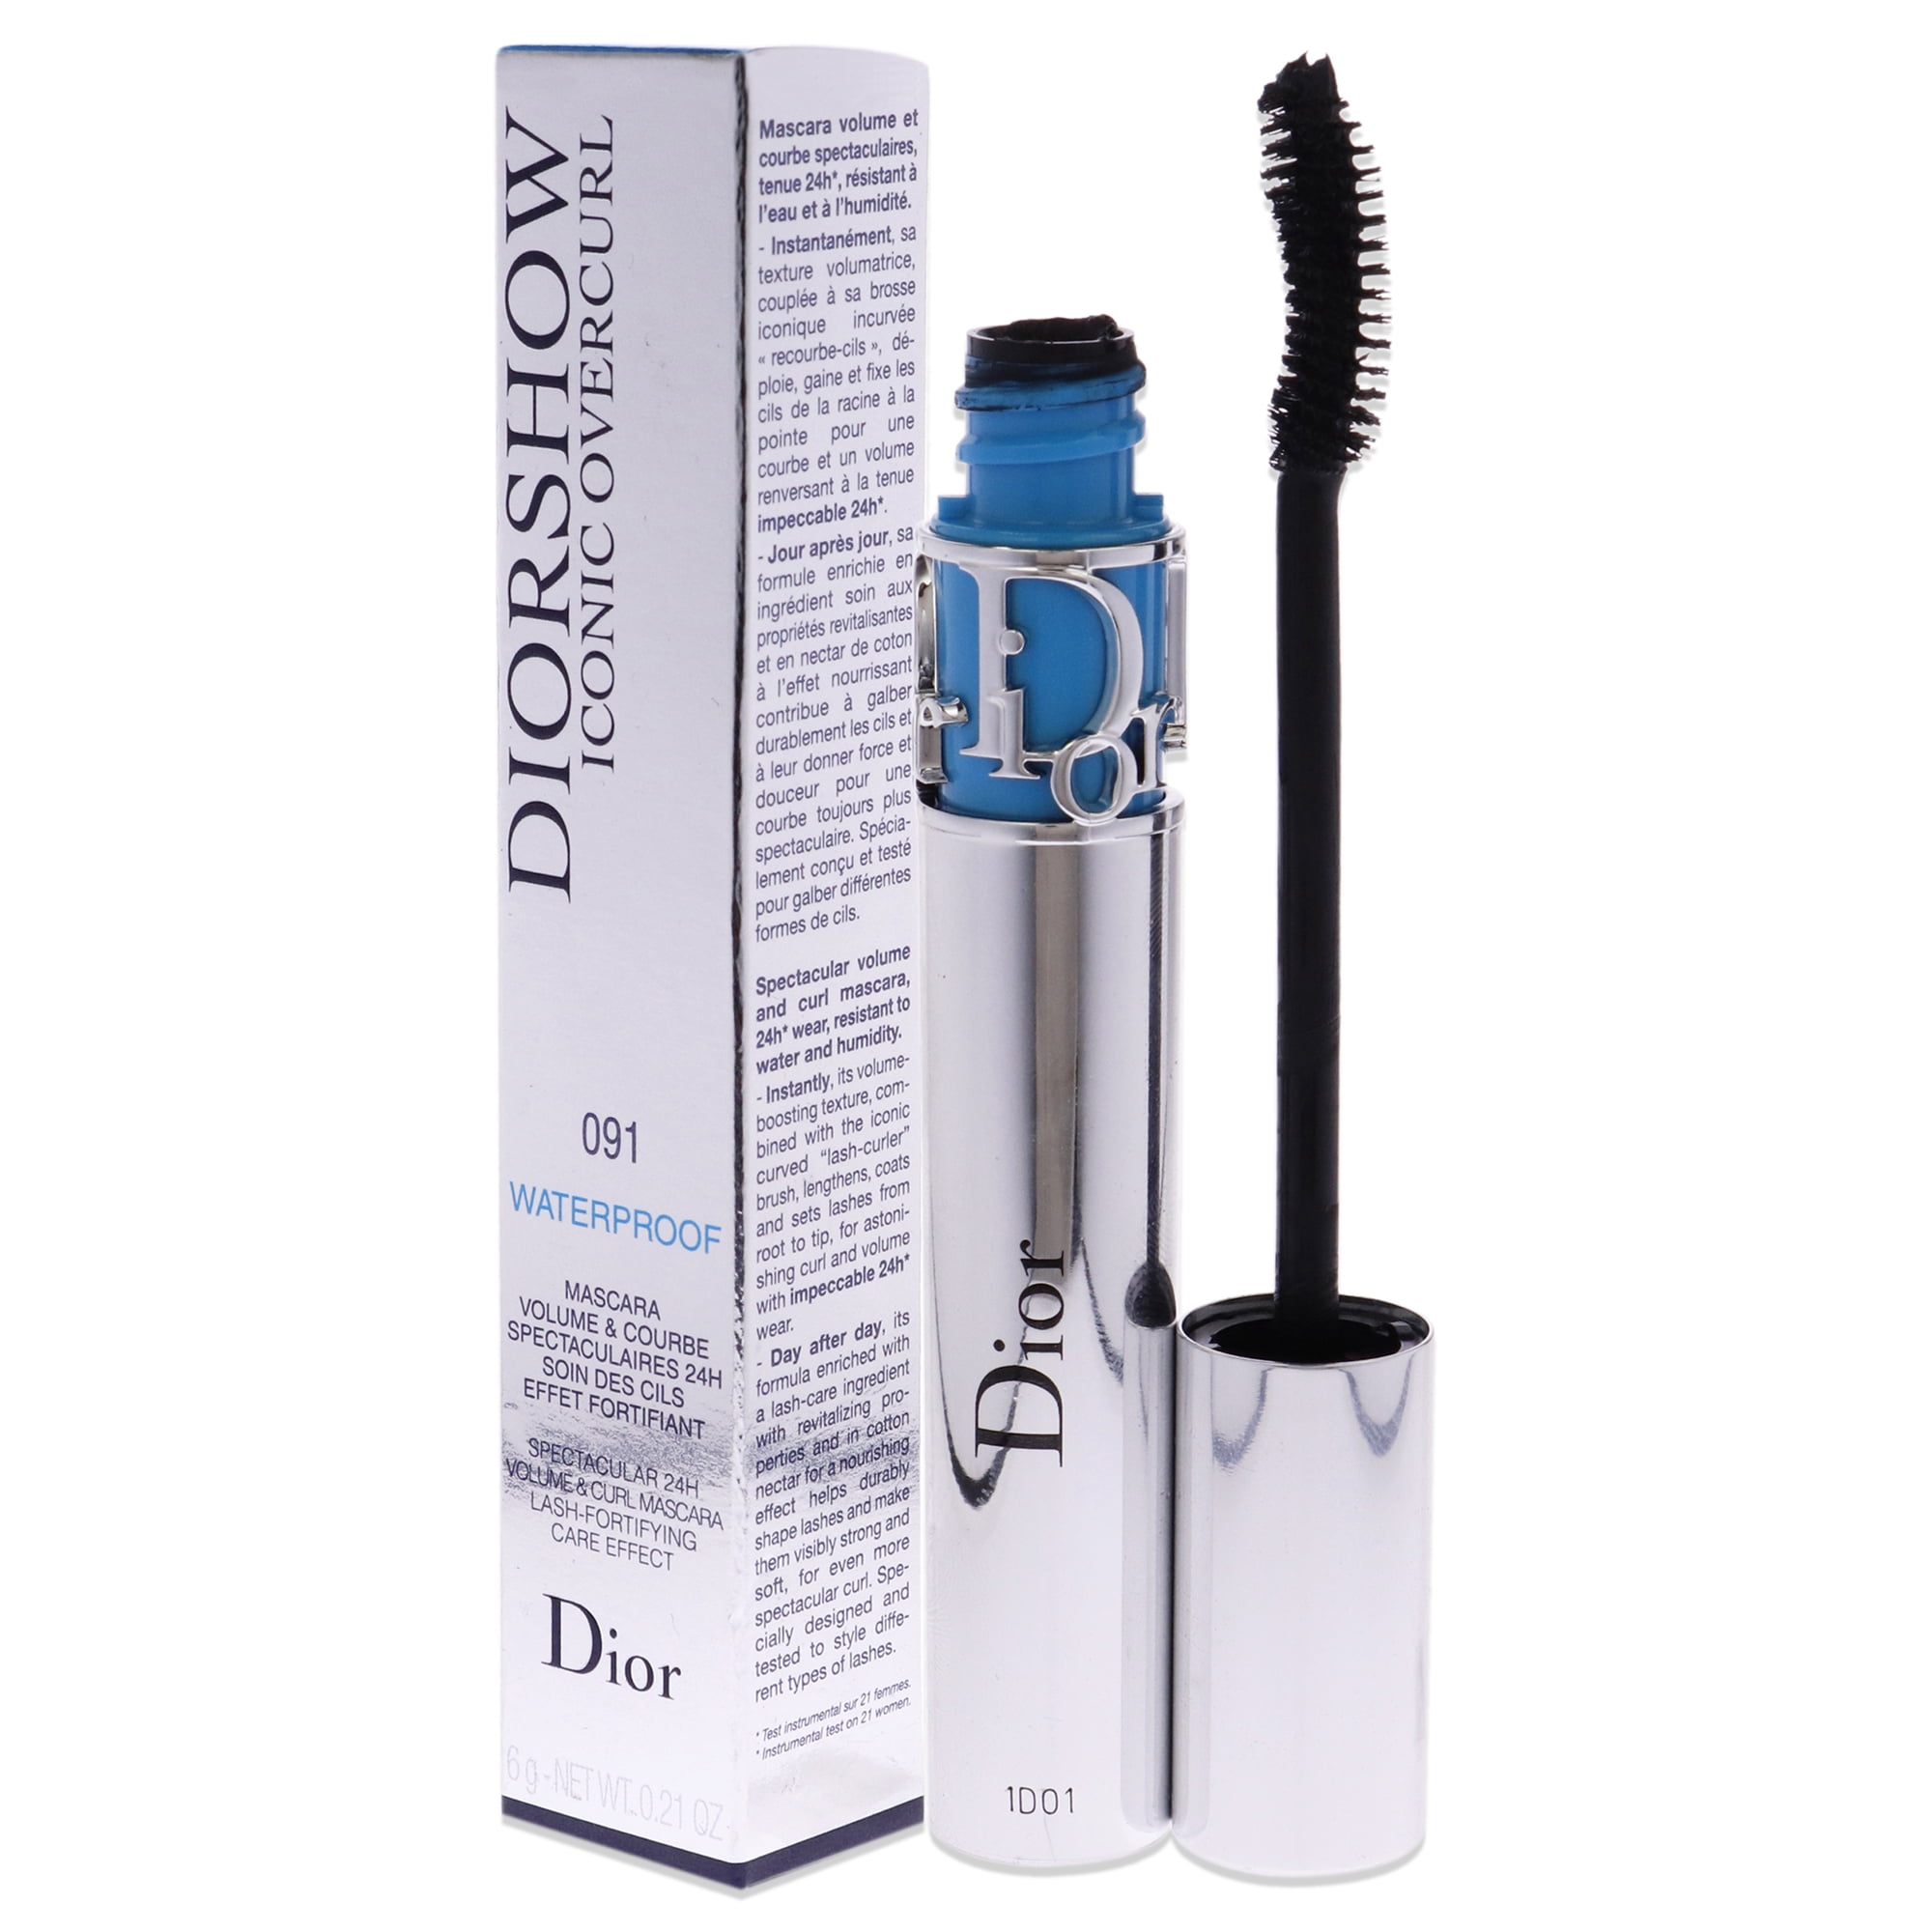 Diorshow Iconic for Black Women oz Mascara 091 Overcurl Over # Mascara - Christian 0.33 Waterproof Dior - by